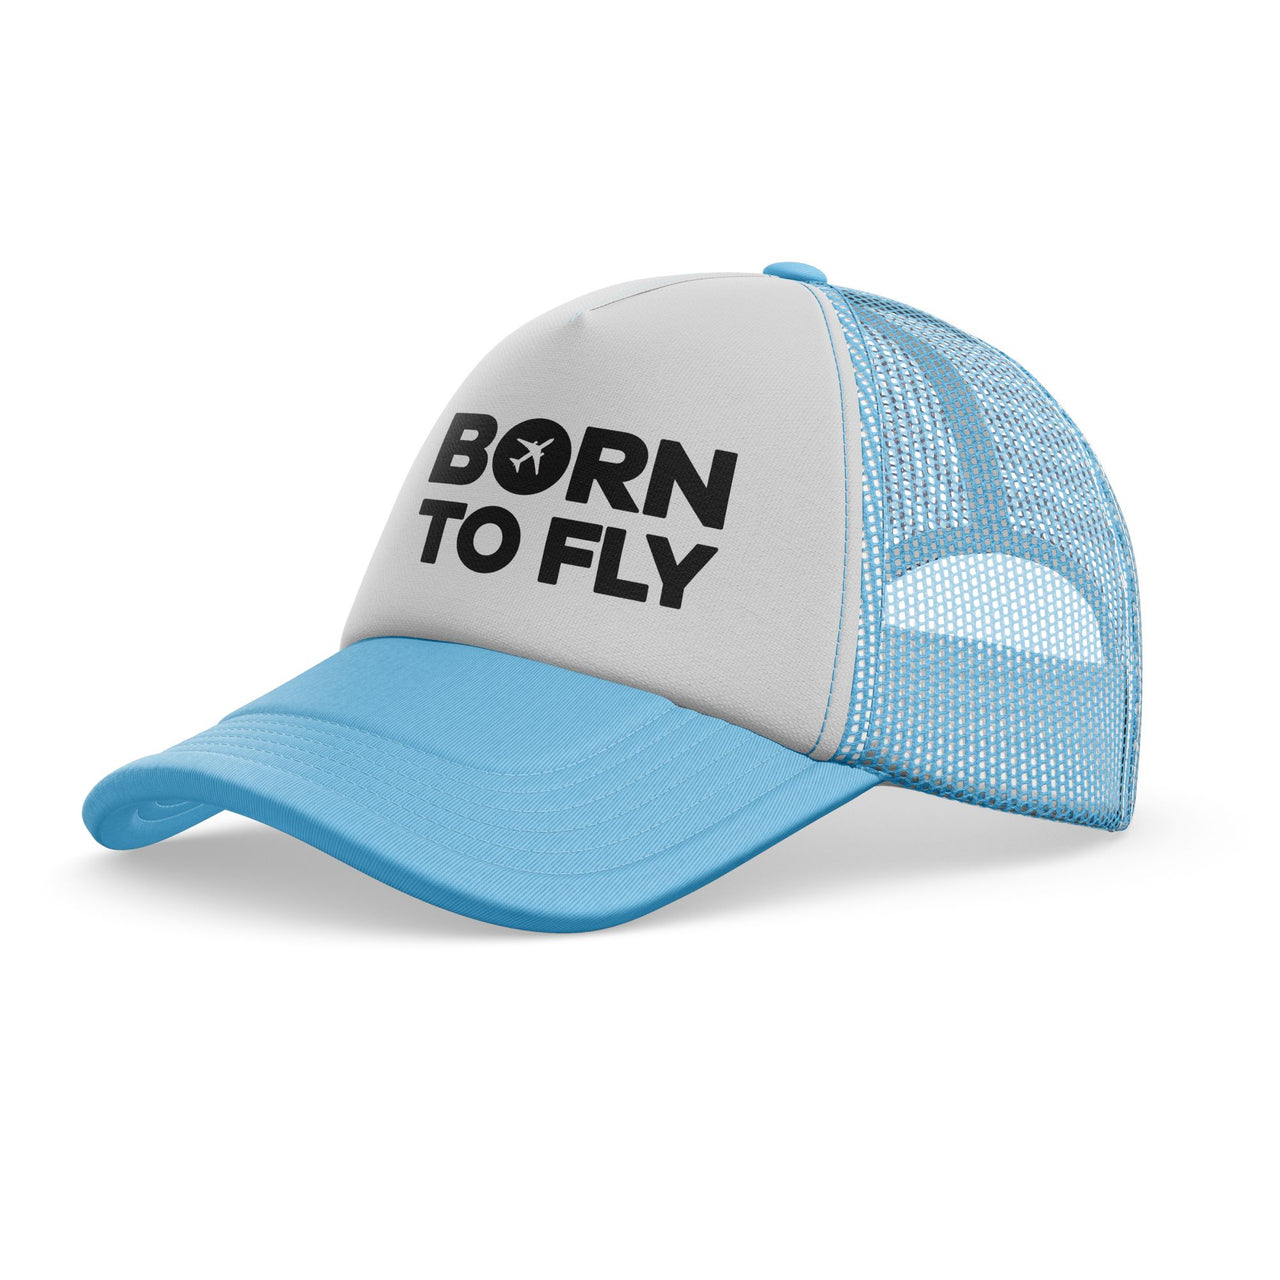 Born To Fly Special Designed Trucker Caps & Hats